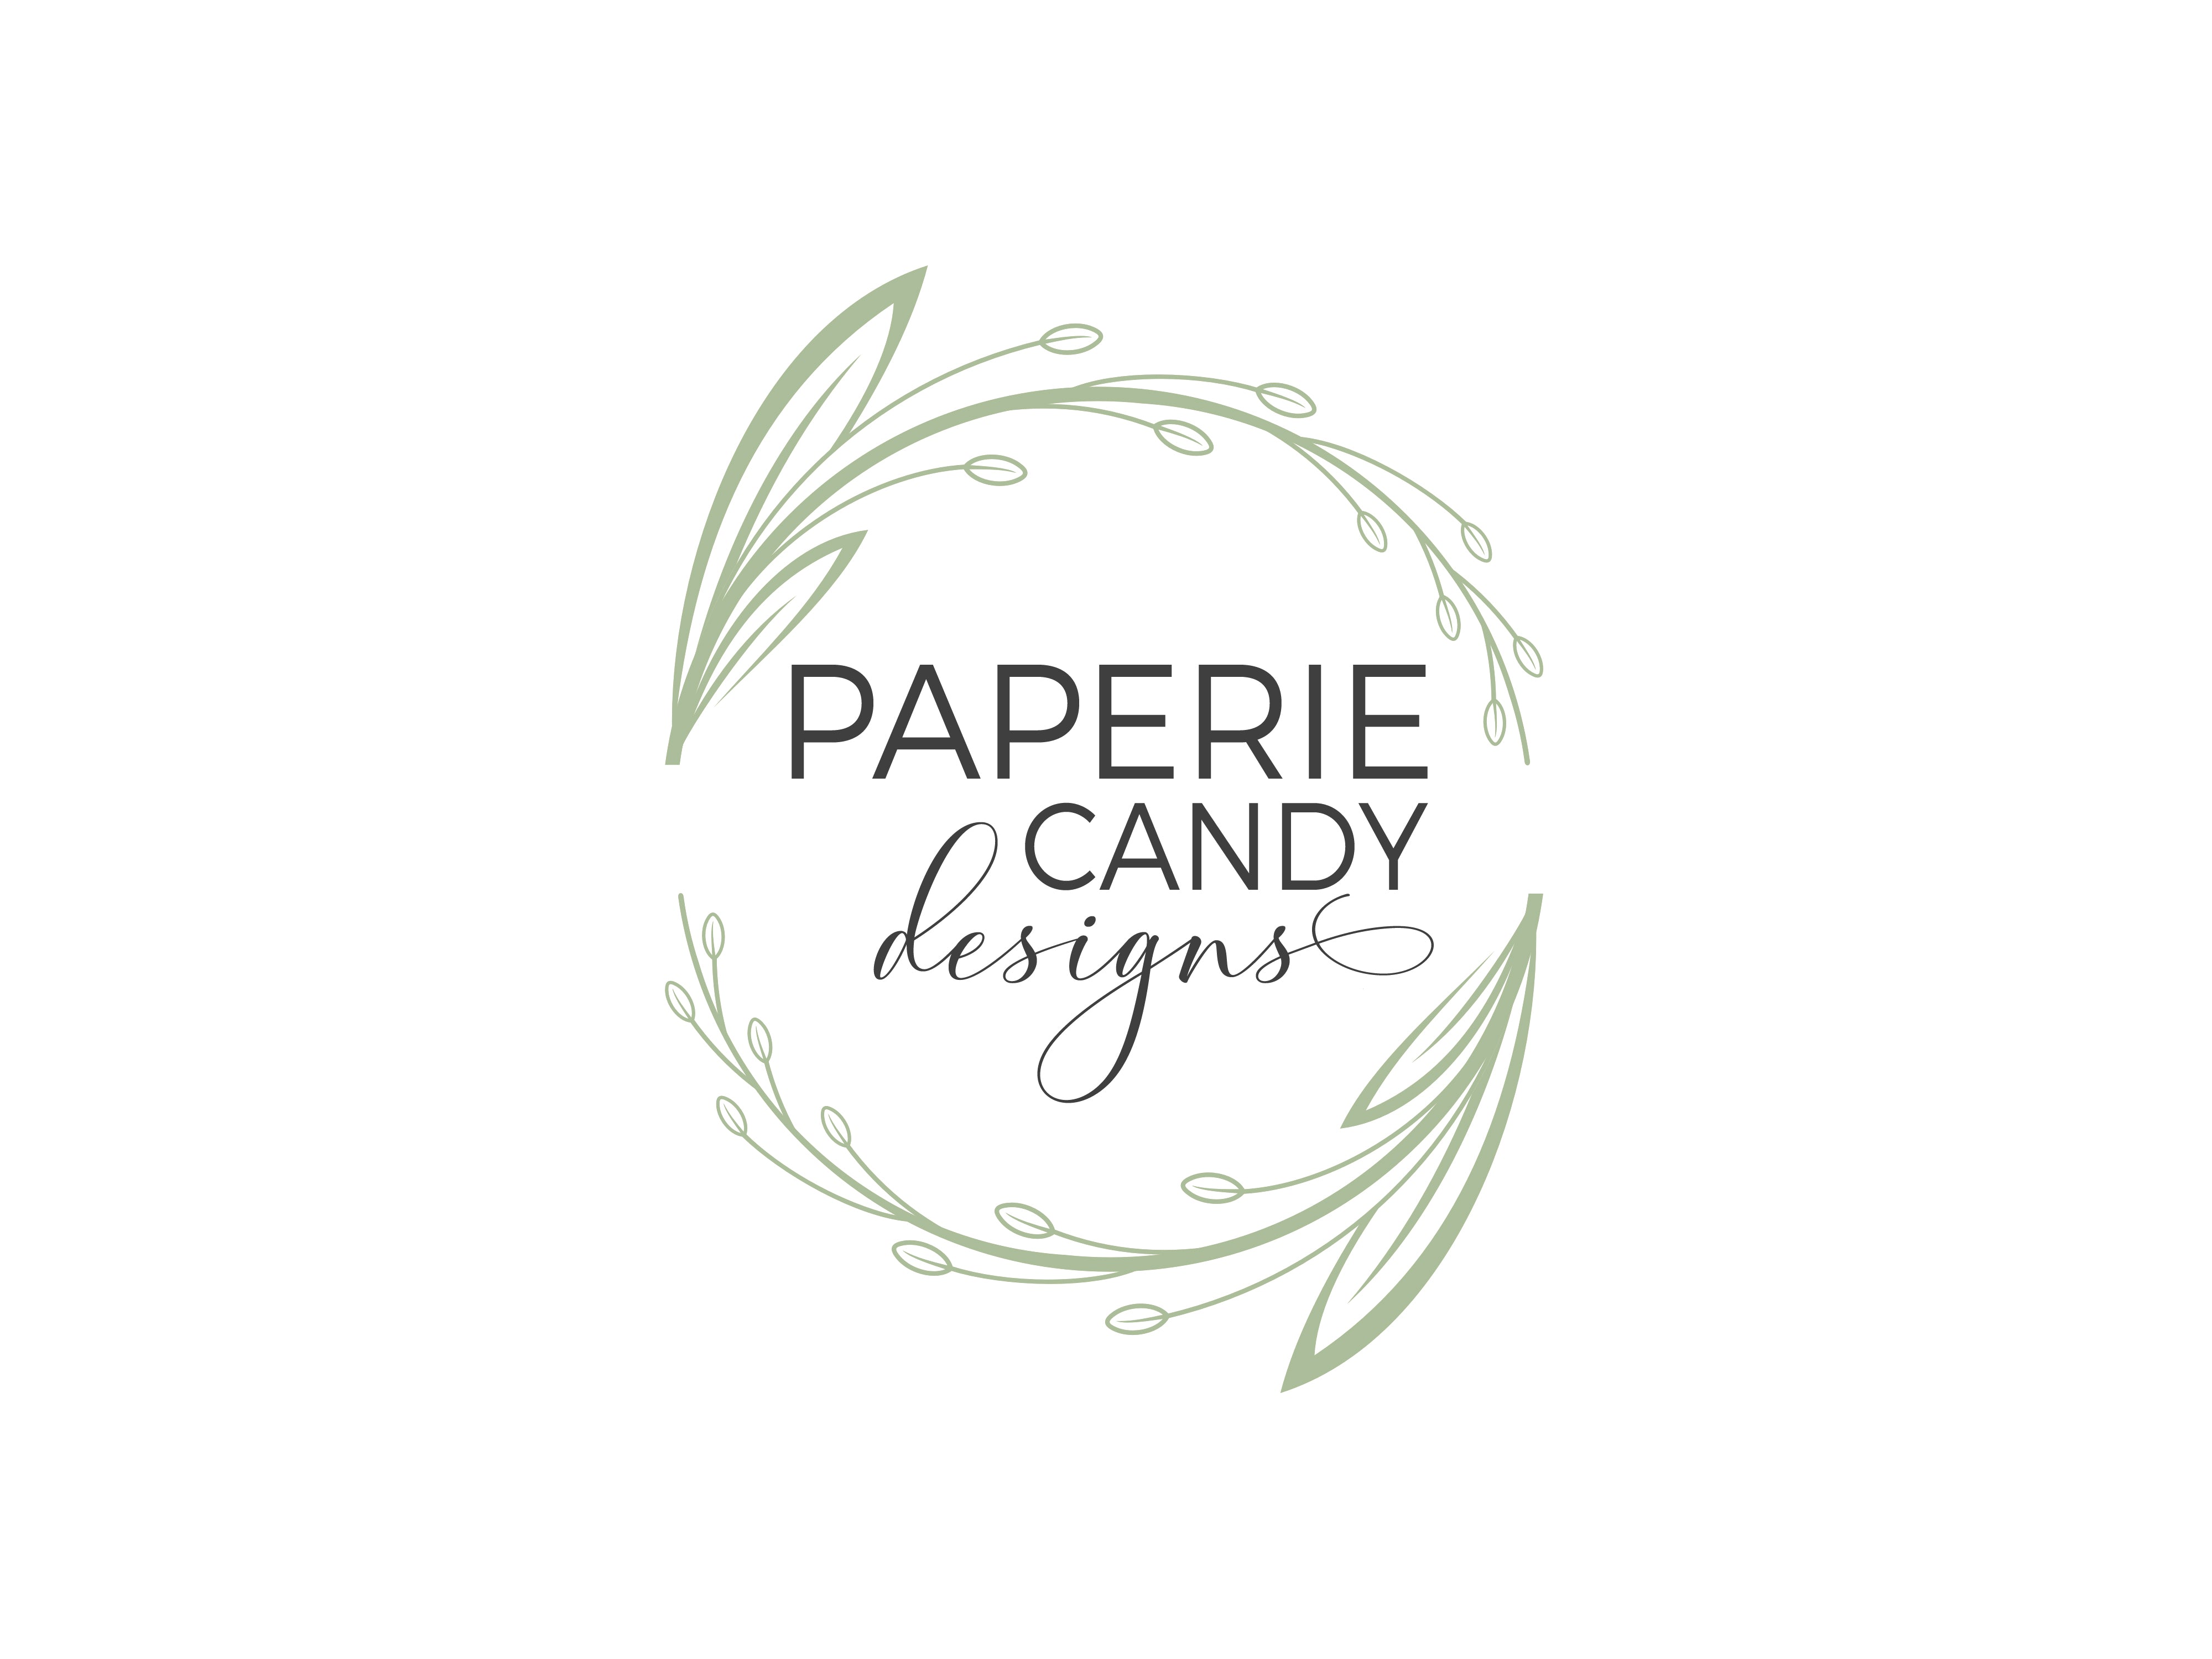 Paperie Candy